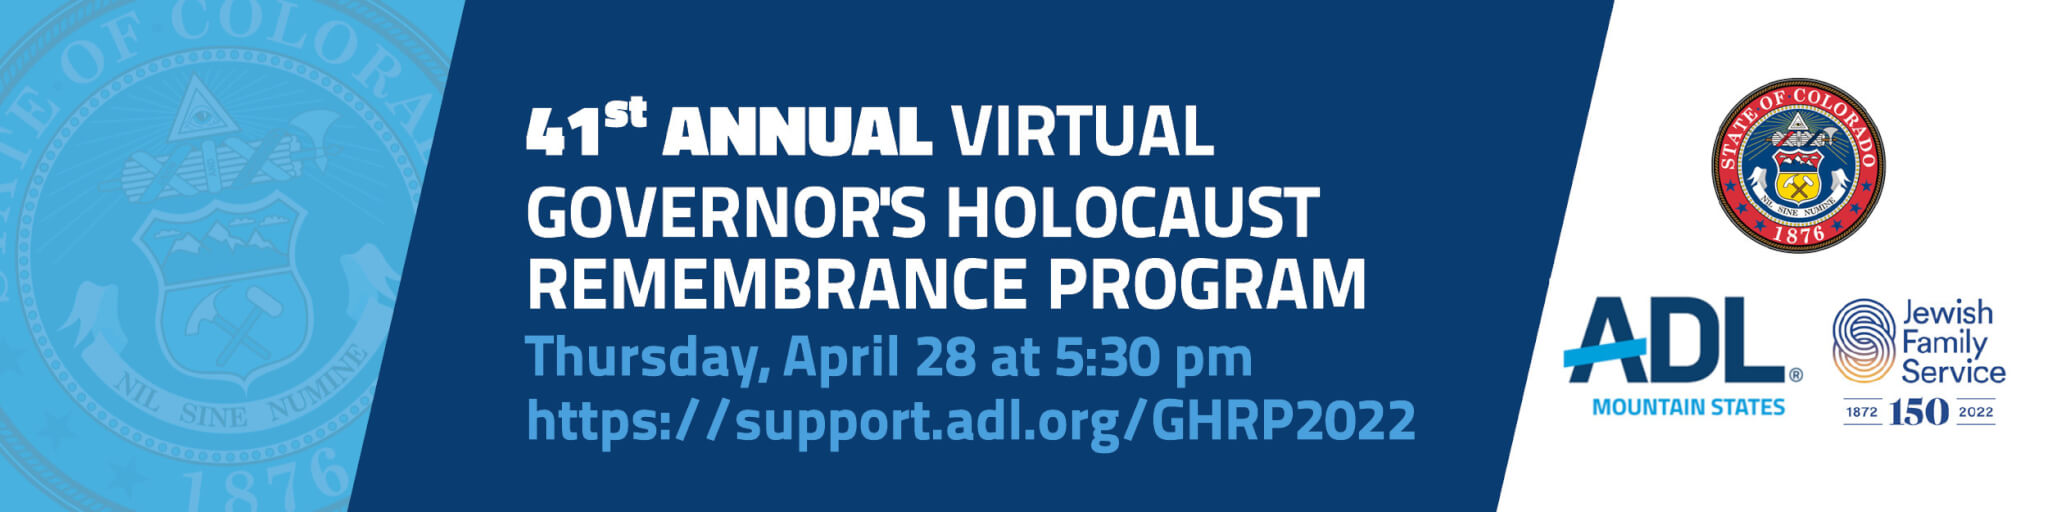 41st Annual Governor's Holocaust Remembrance Program